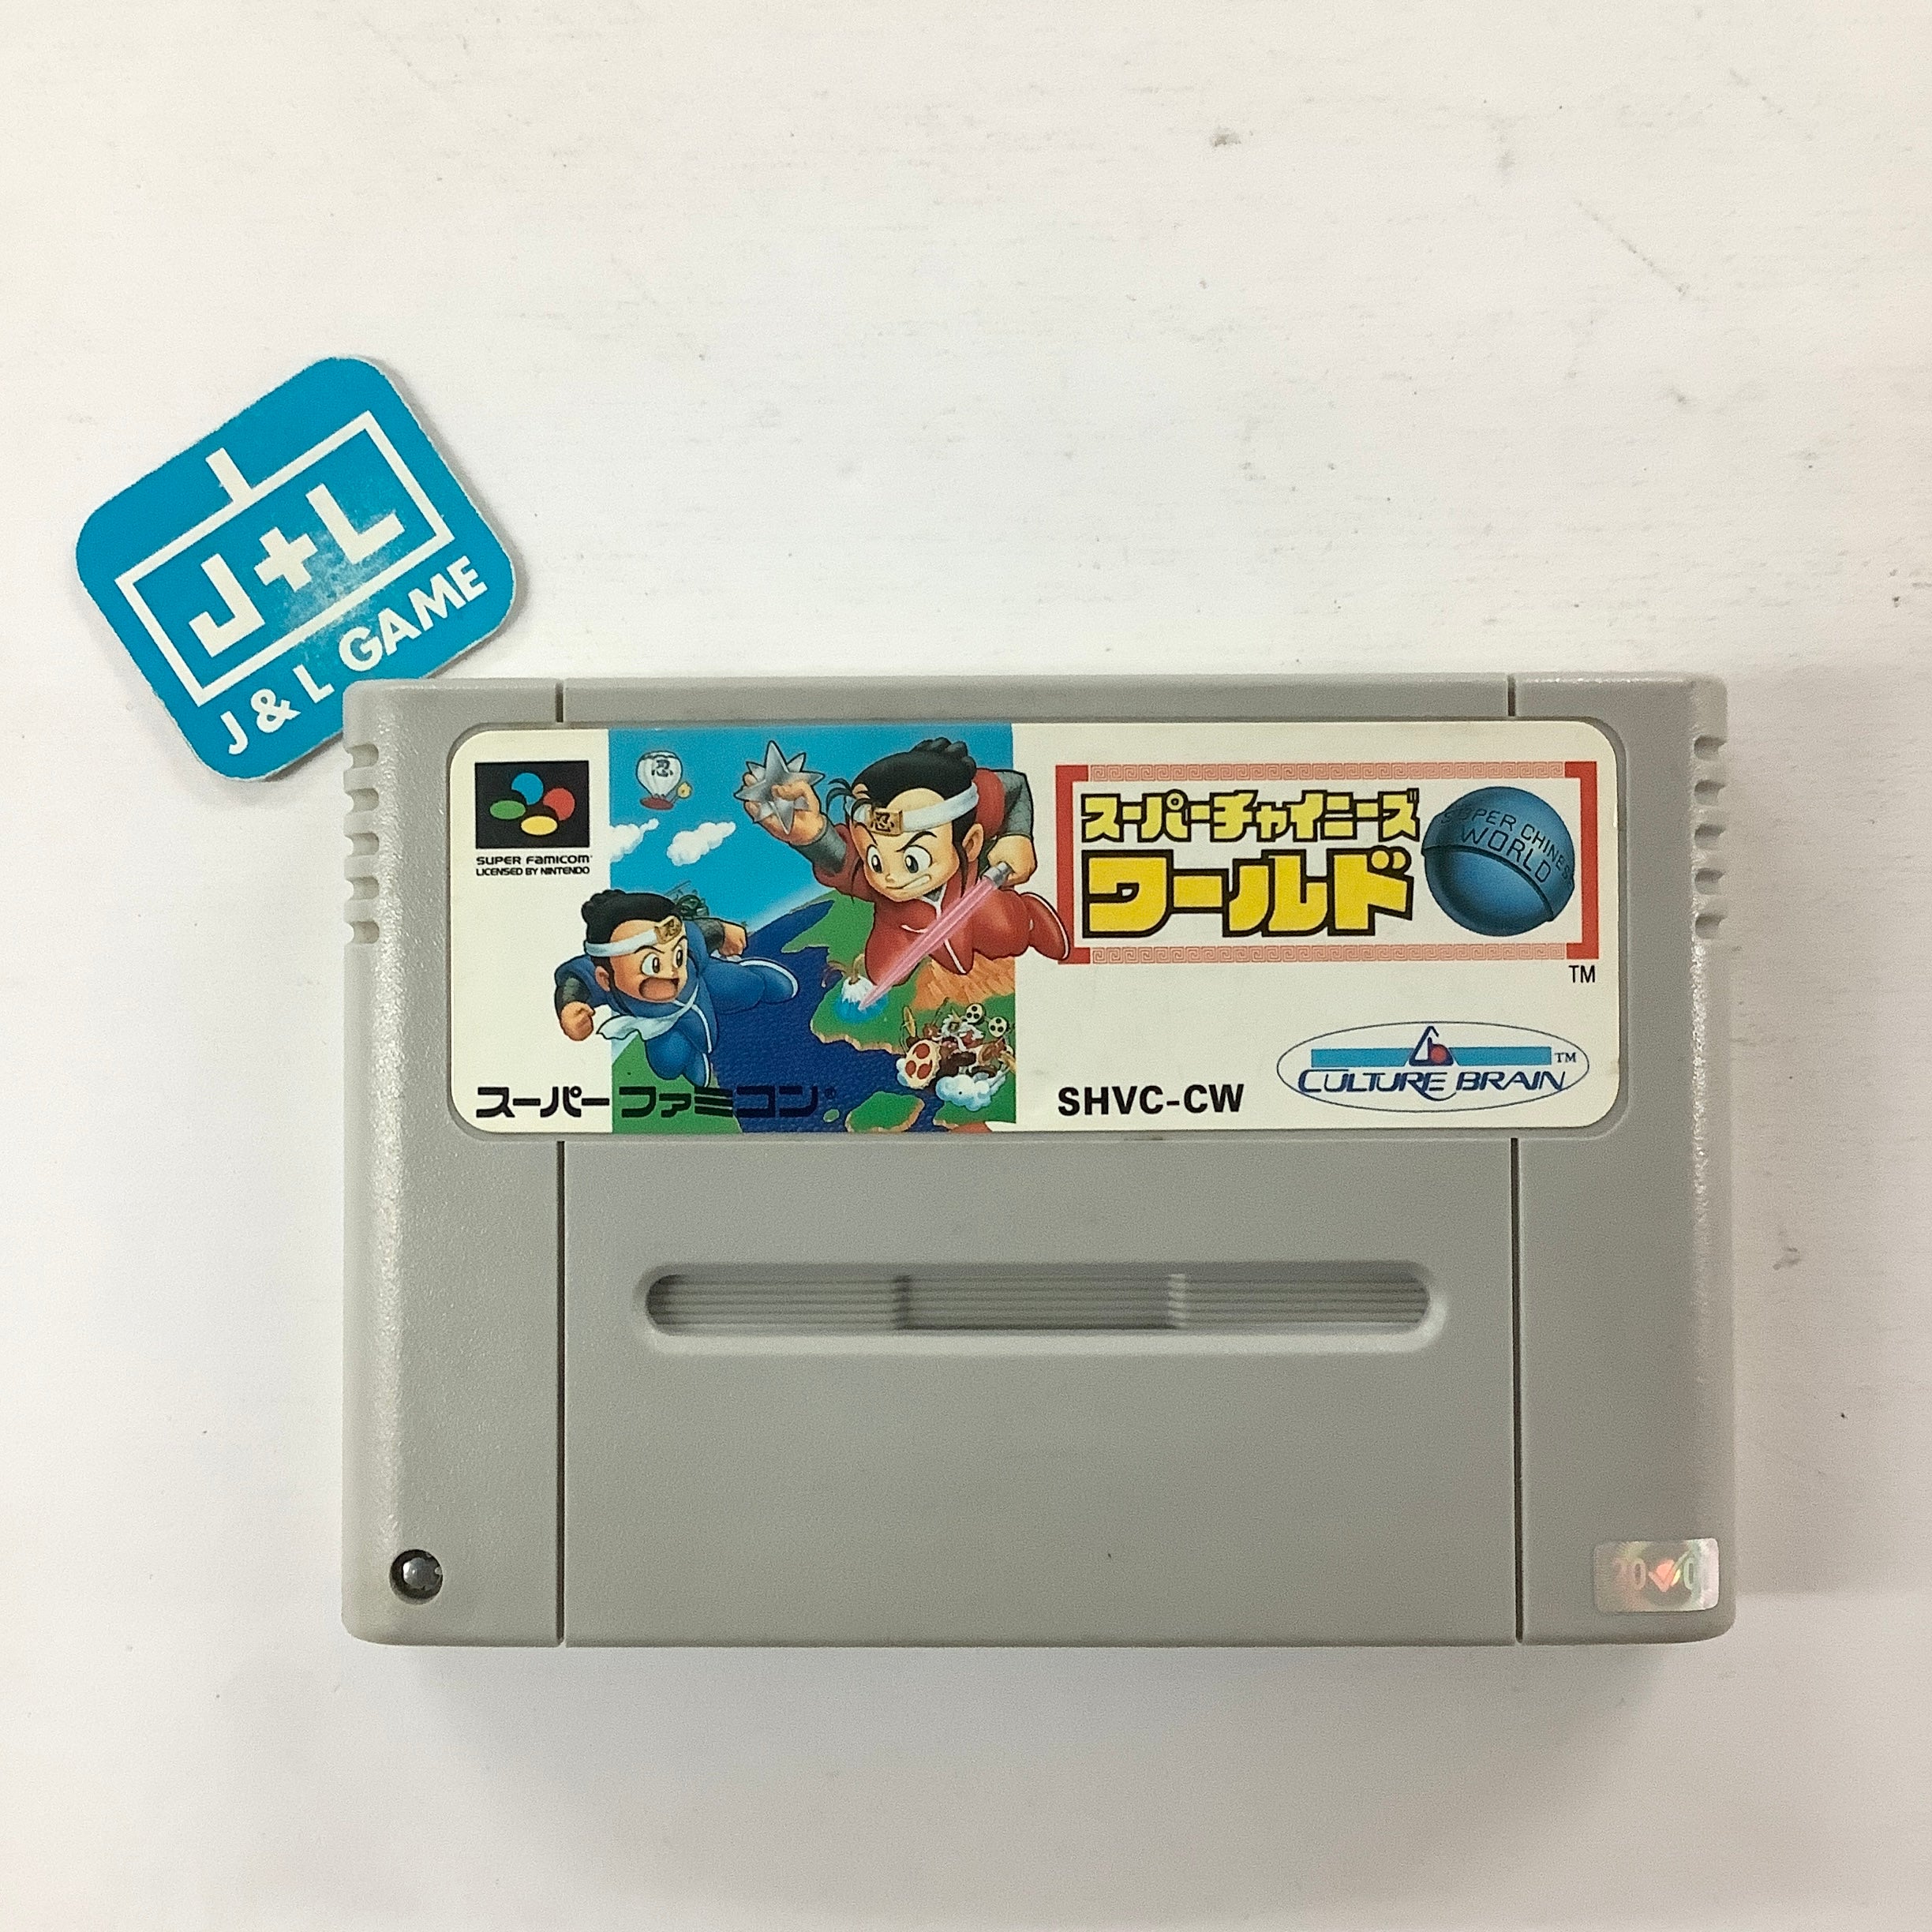 Super Chinese World - (SFC) Super Famicom [Pre-Owned] (Japanese Import) Video Games Culture Brain   